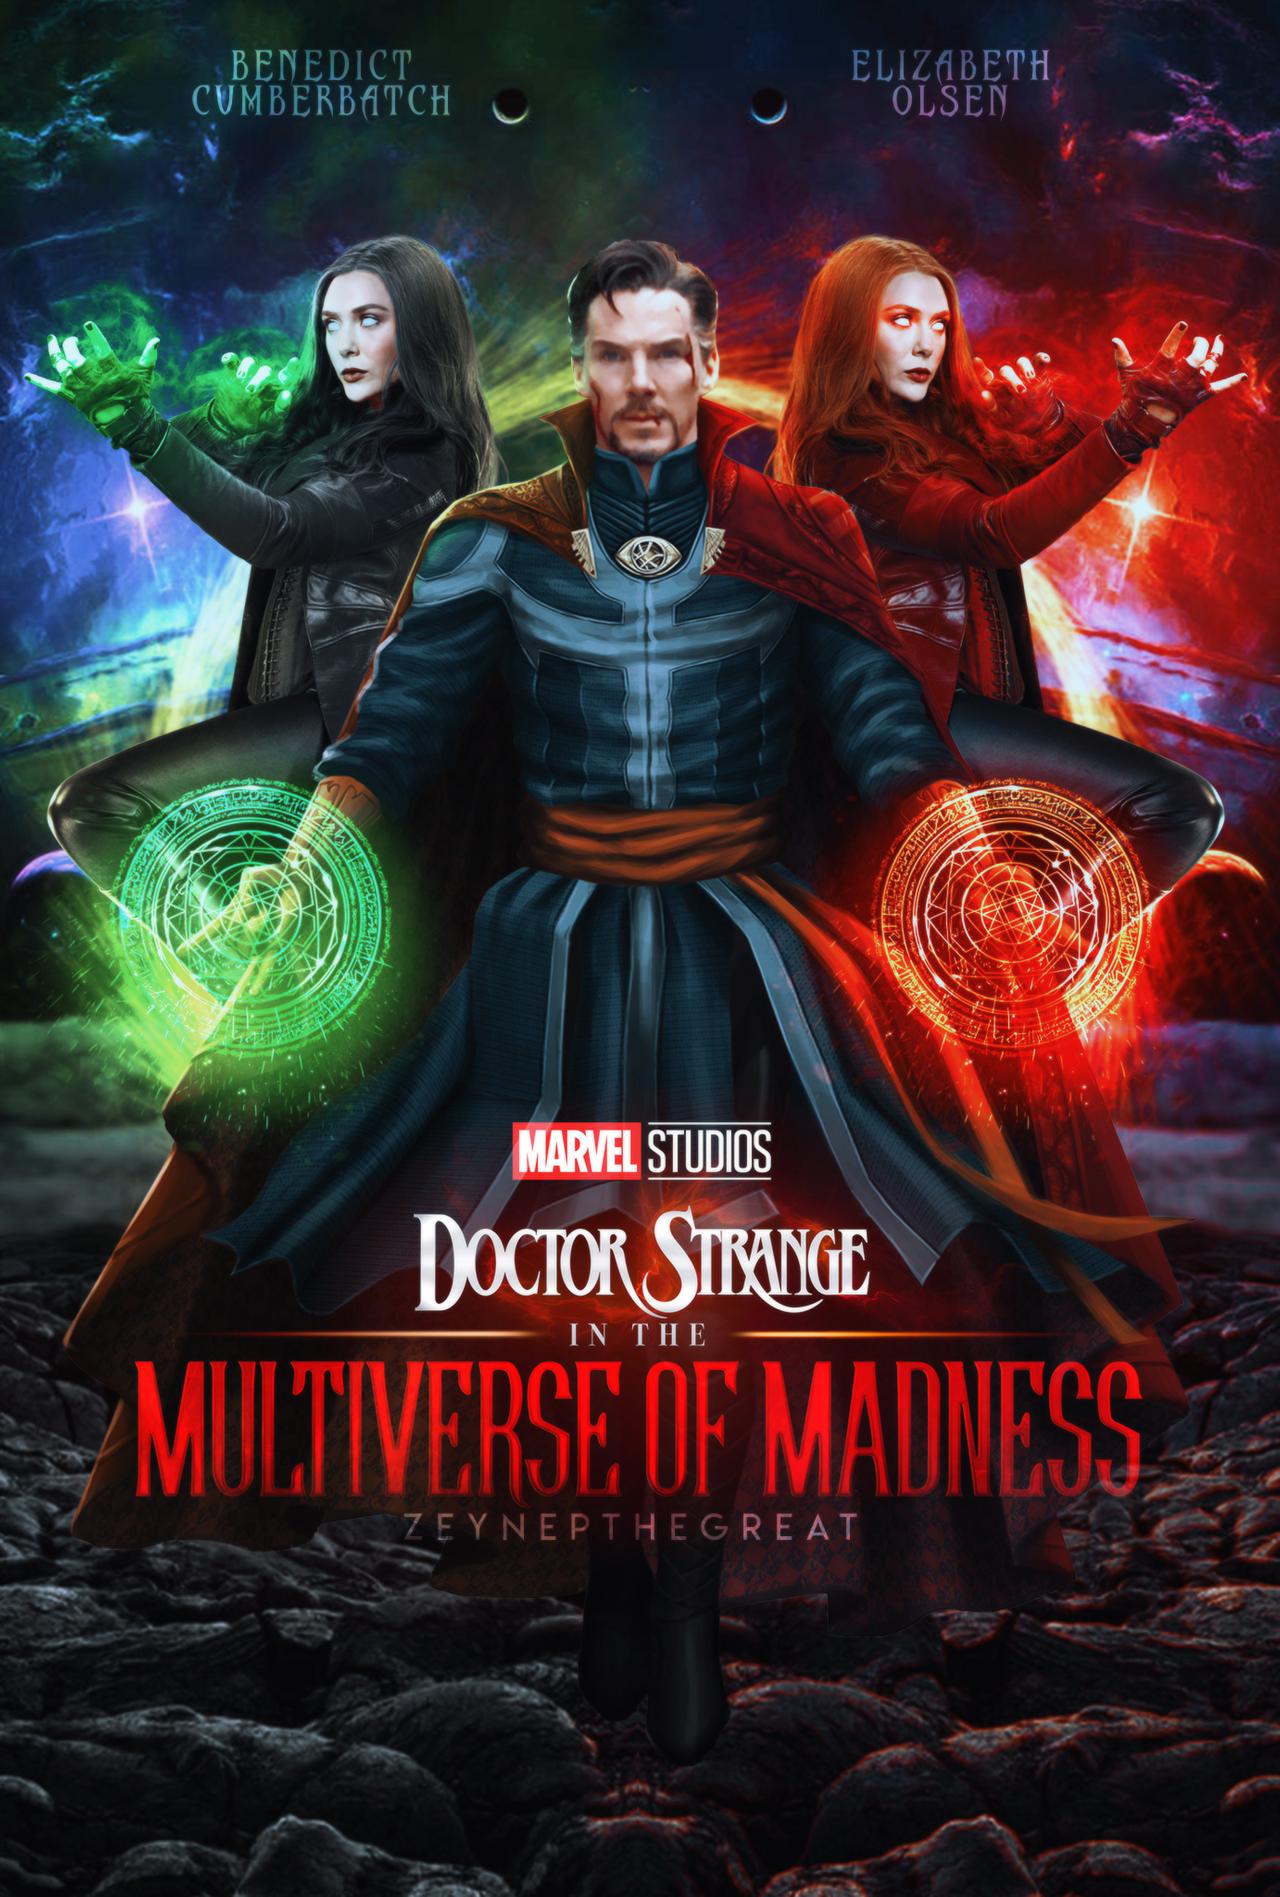 Doctor Strange In The Multiverse Of Madness Arriving In 2022, Confirmed